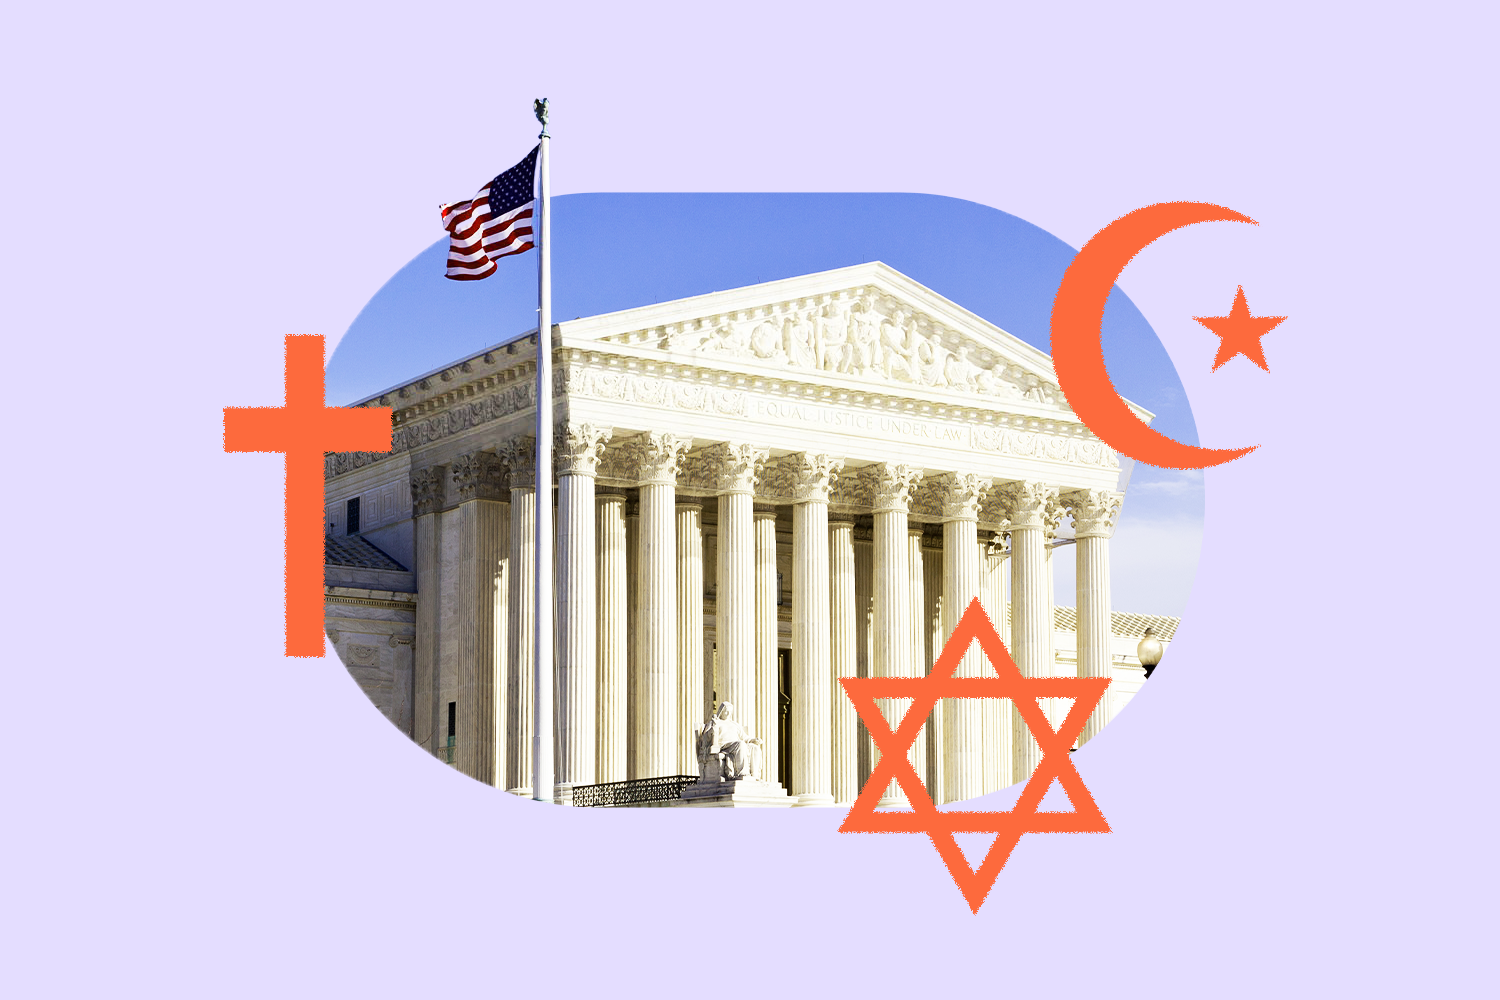 The United States Supreme Court building on a sunny day surrounded by the Christian Cross, the Star of David, and the Crescent and Star